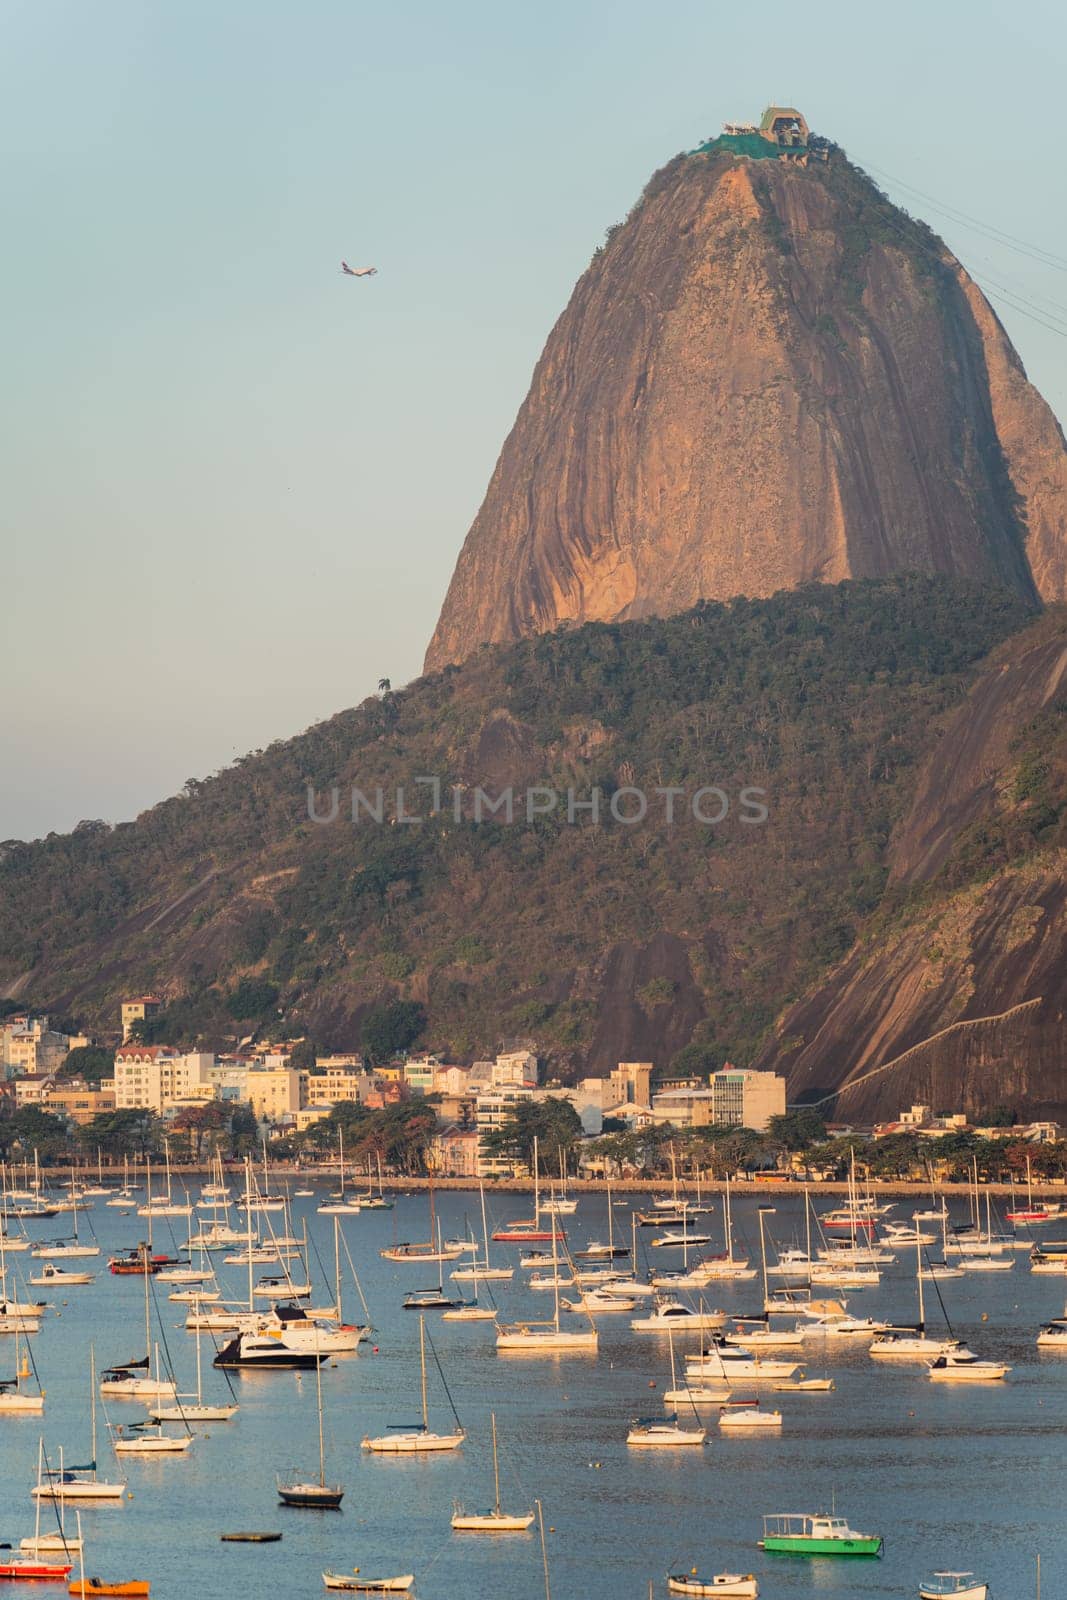 Breathtaking View of Sugarloaf Mountain in Rio at Sunset by FerradalFCG